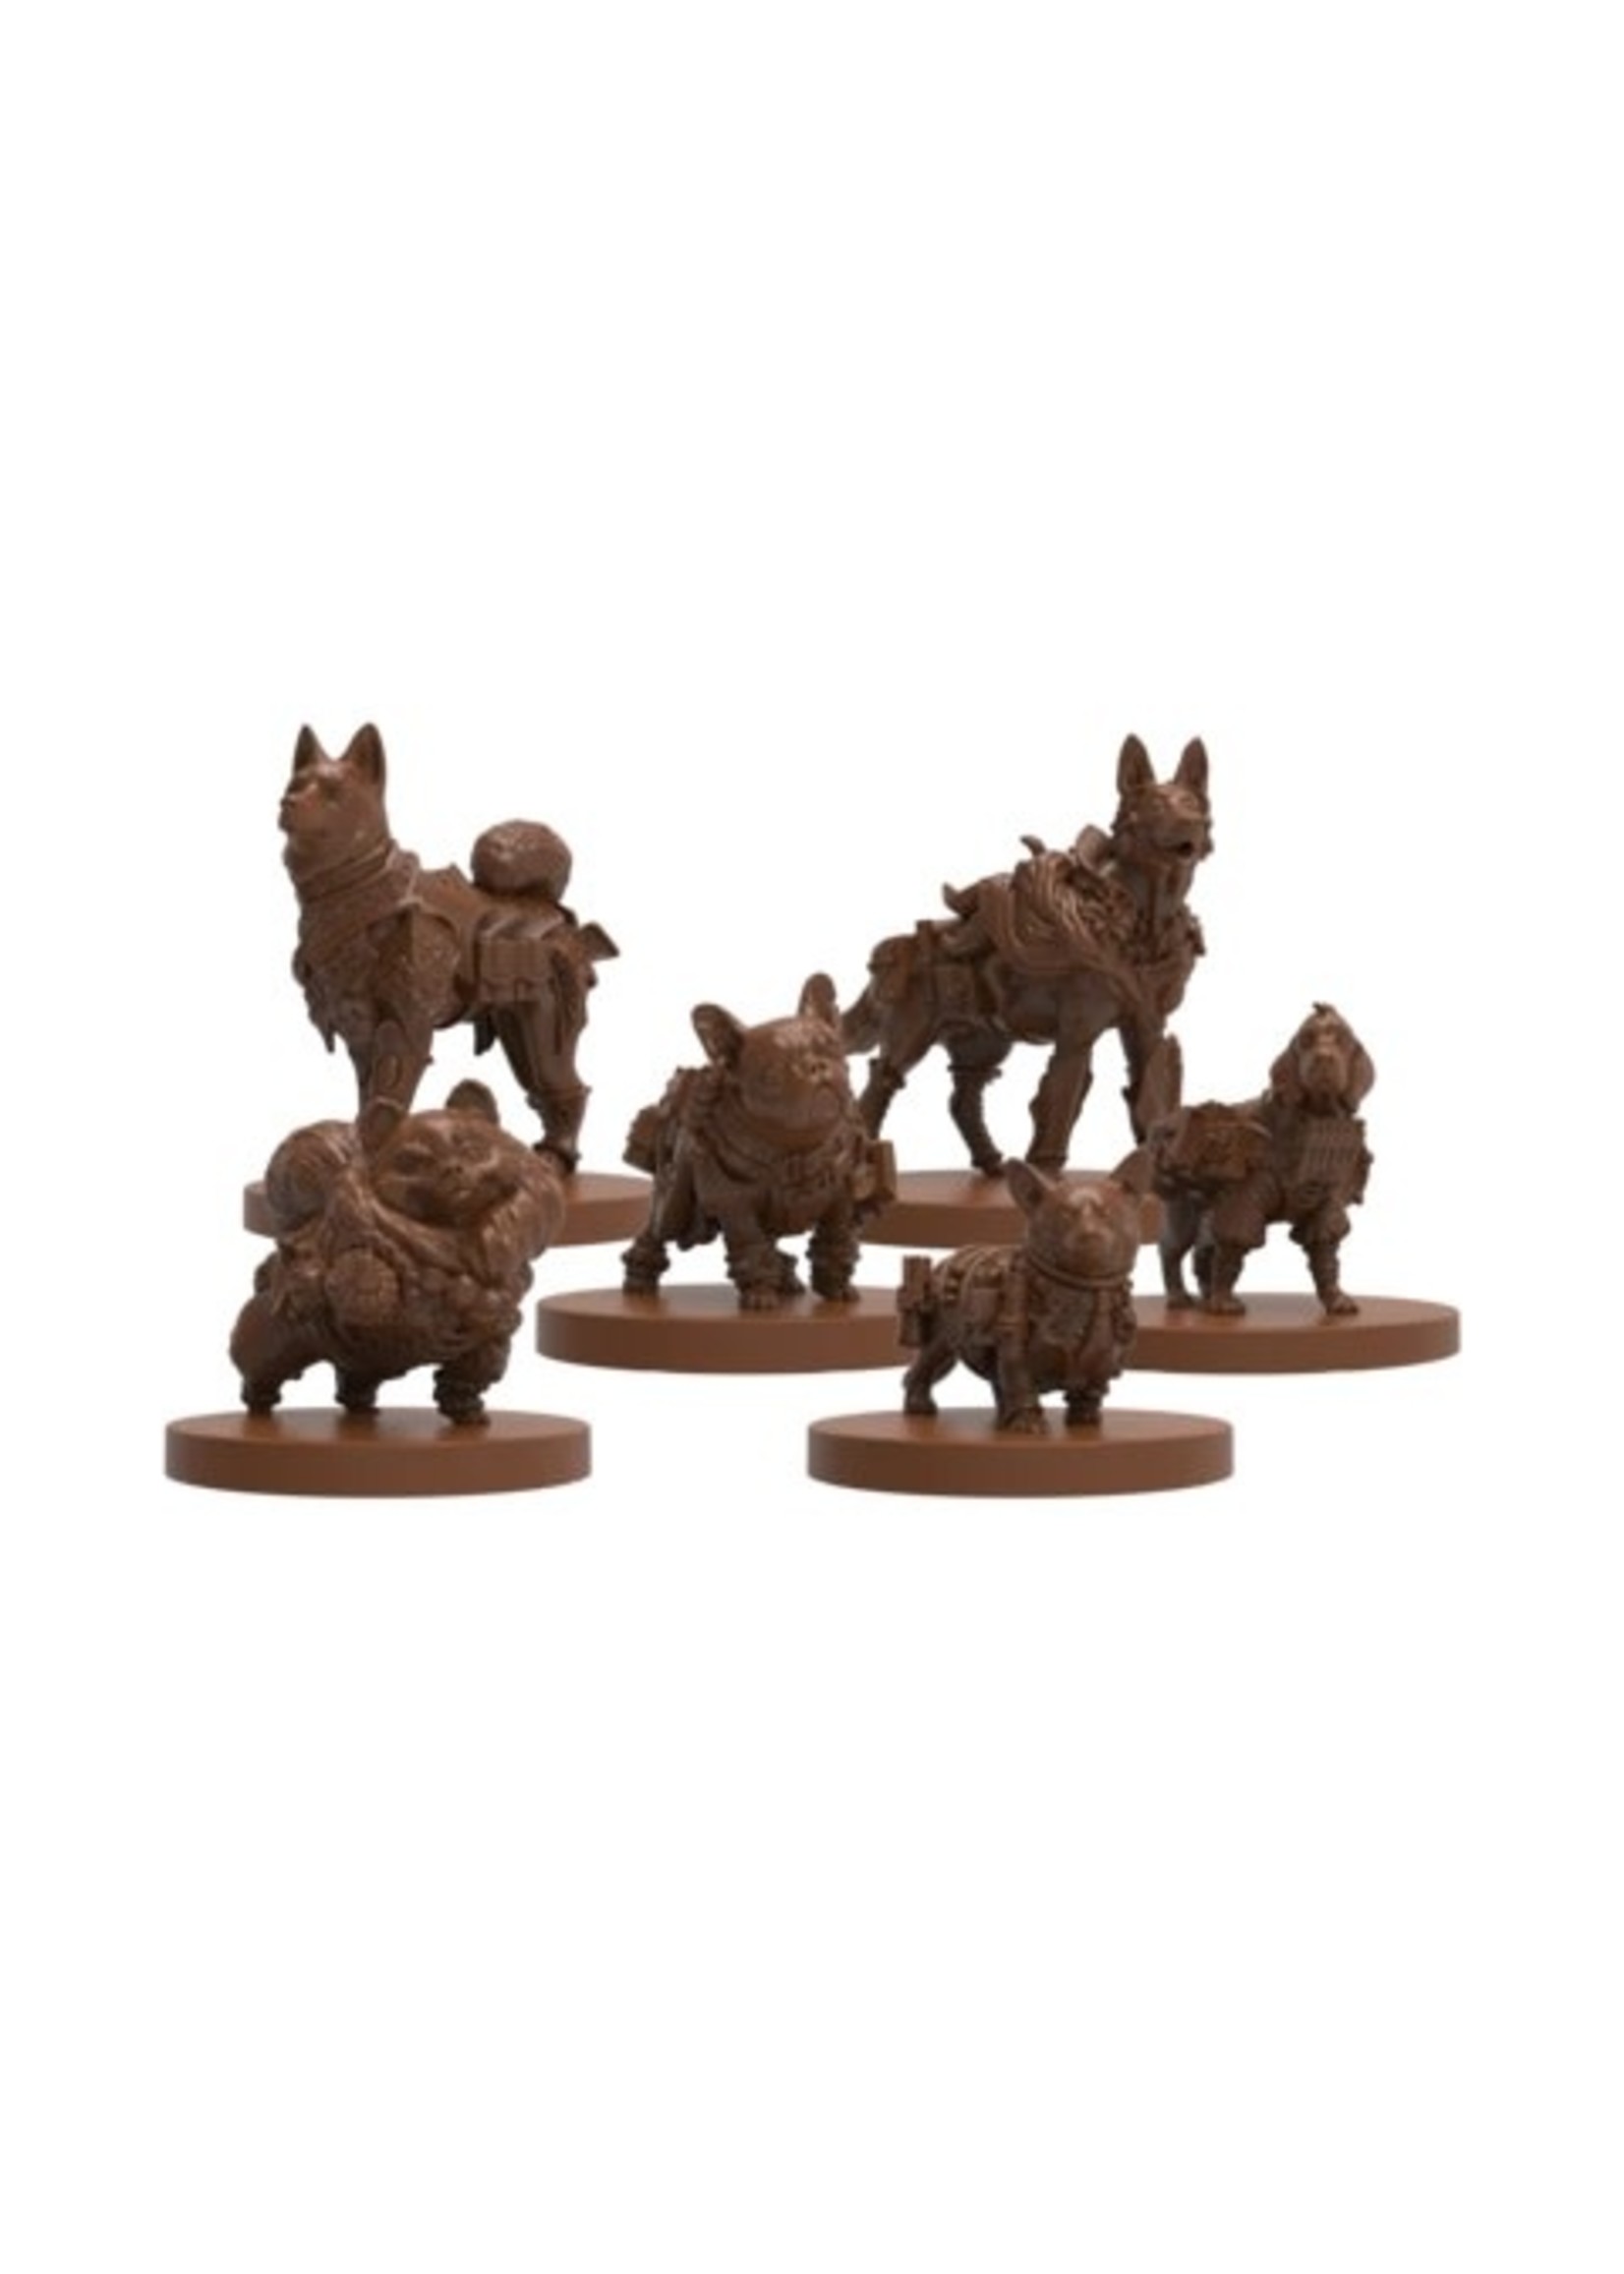 Steamforged Games LTD Animal Adventures: Tales of Dungeons & Doggies